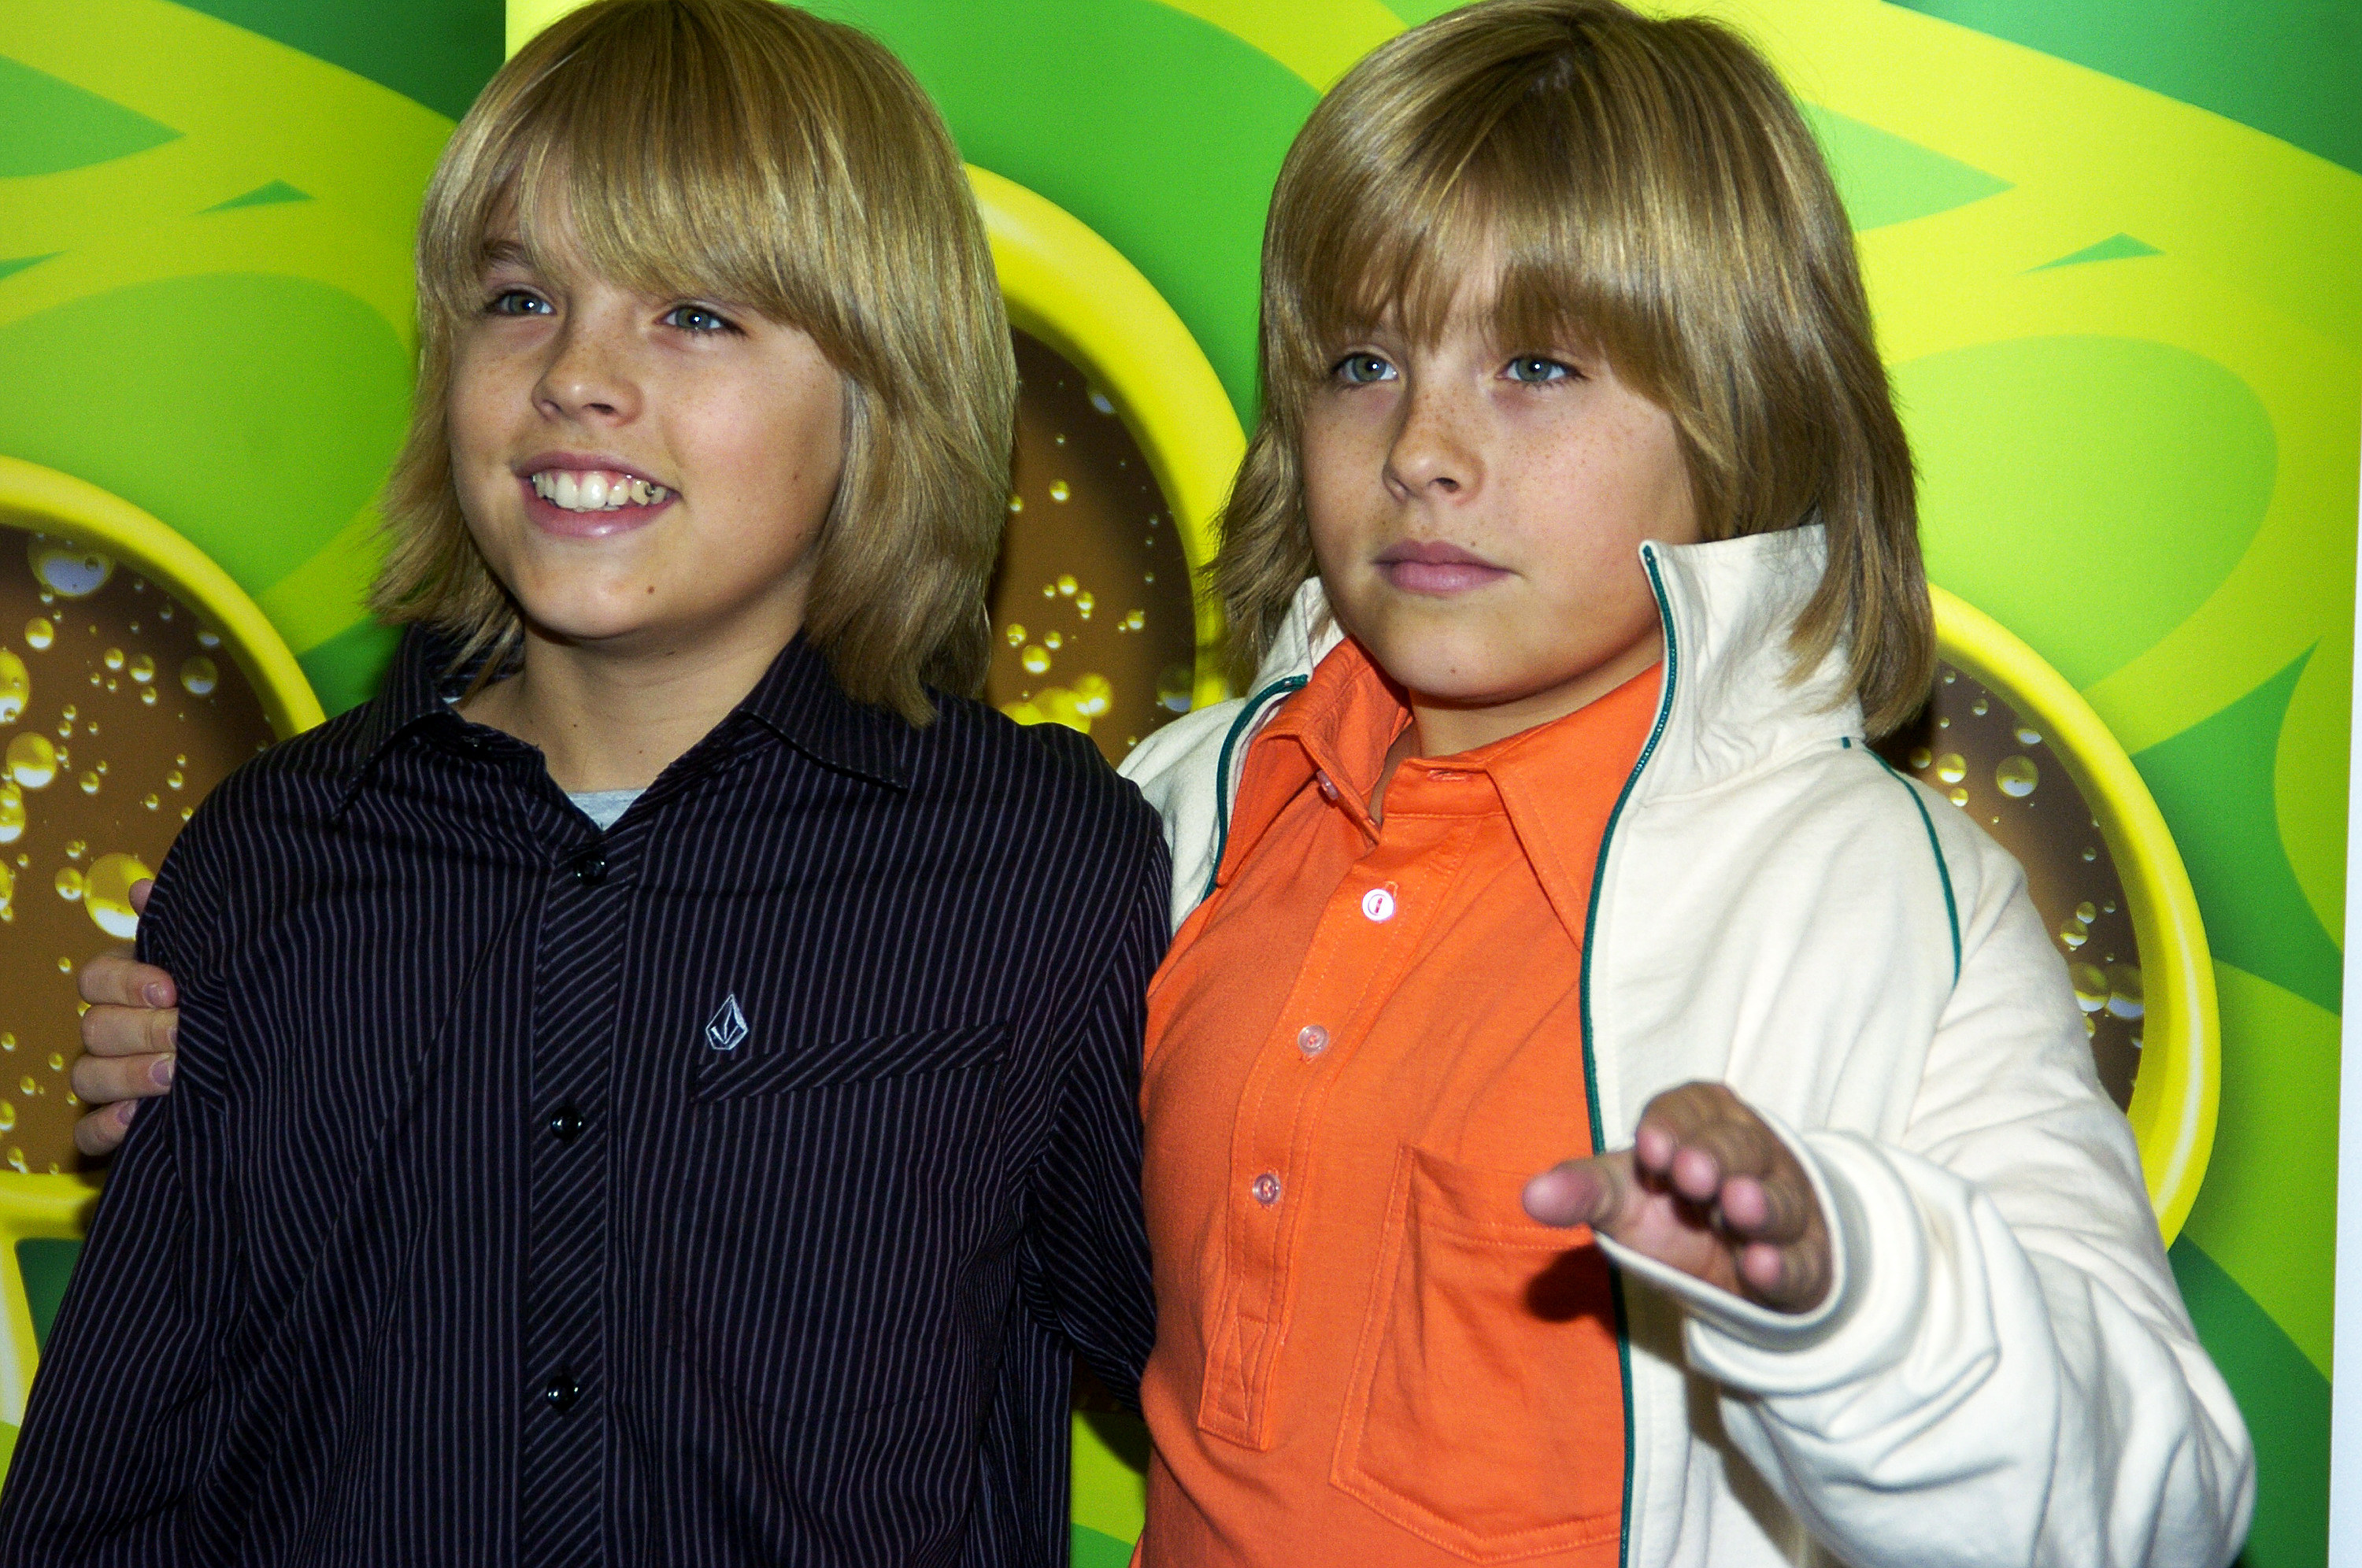 Cole Sprouse and Dylan Sprouse pose at an event at Splashlight Studios circa 2006